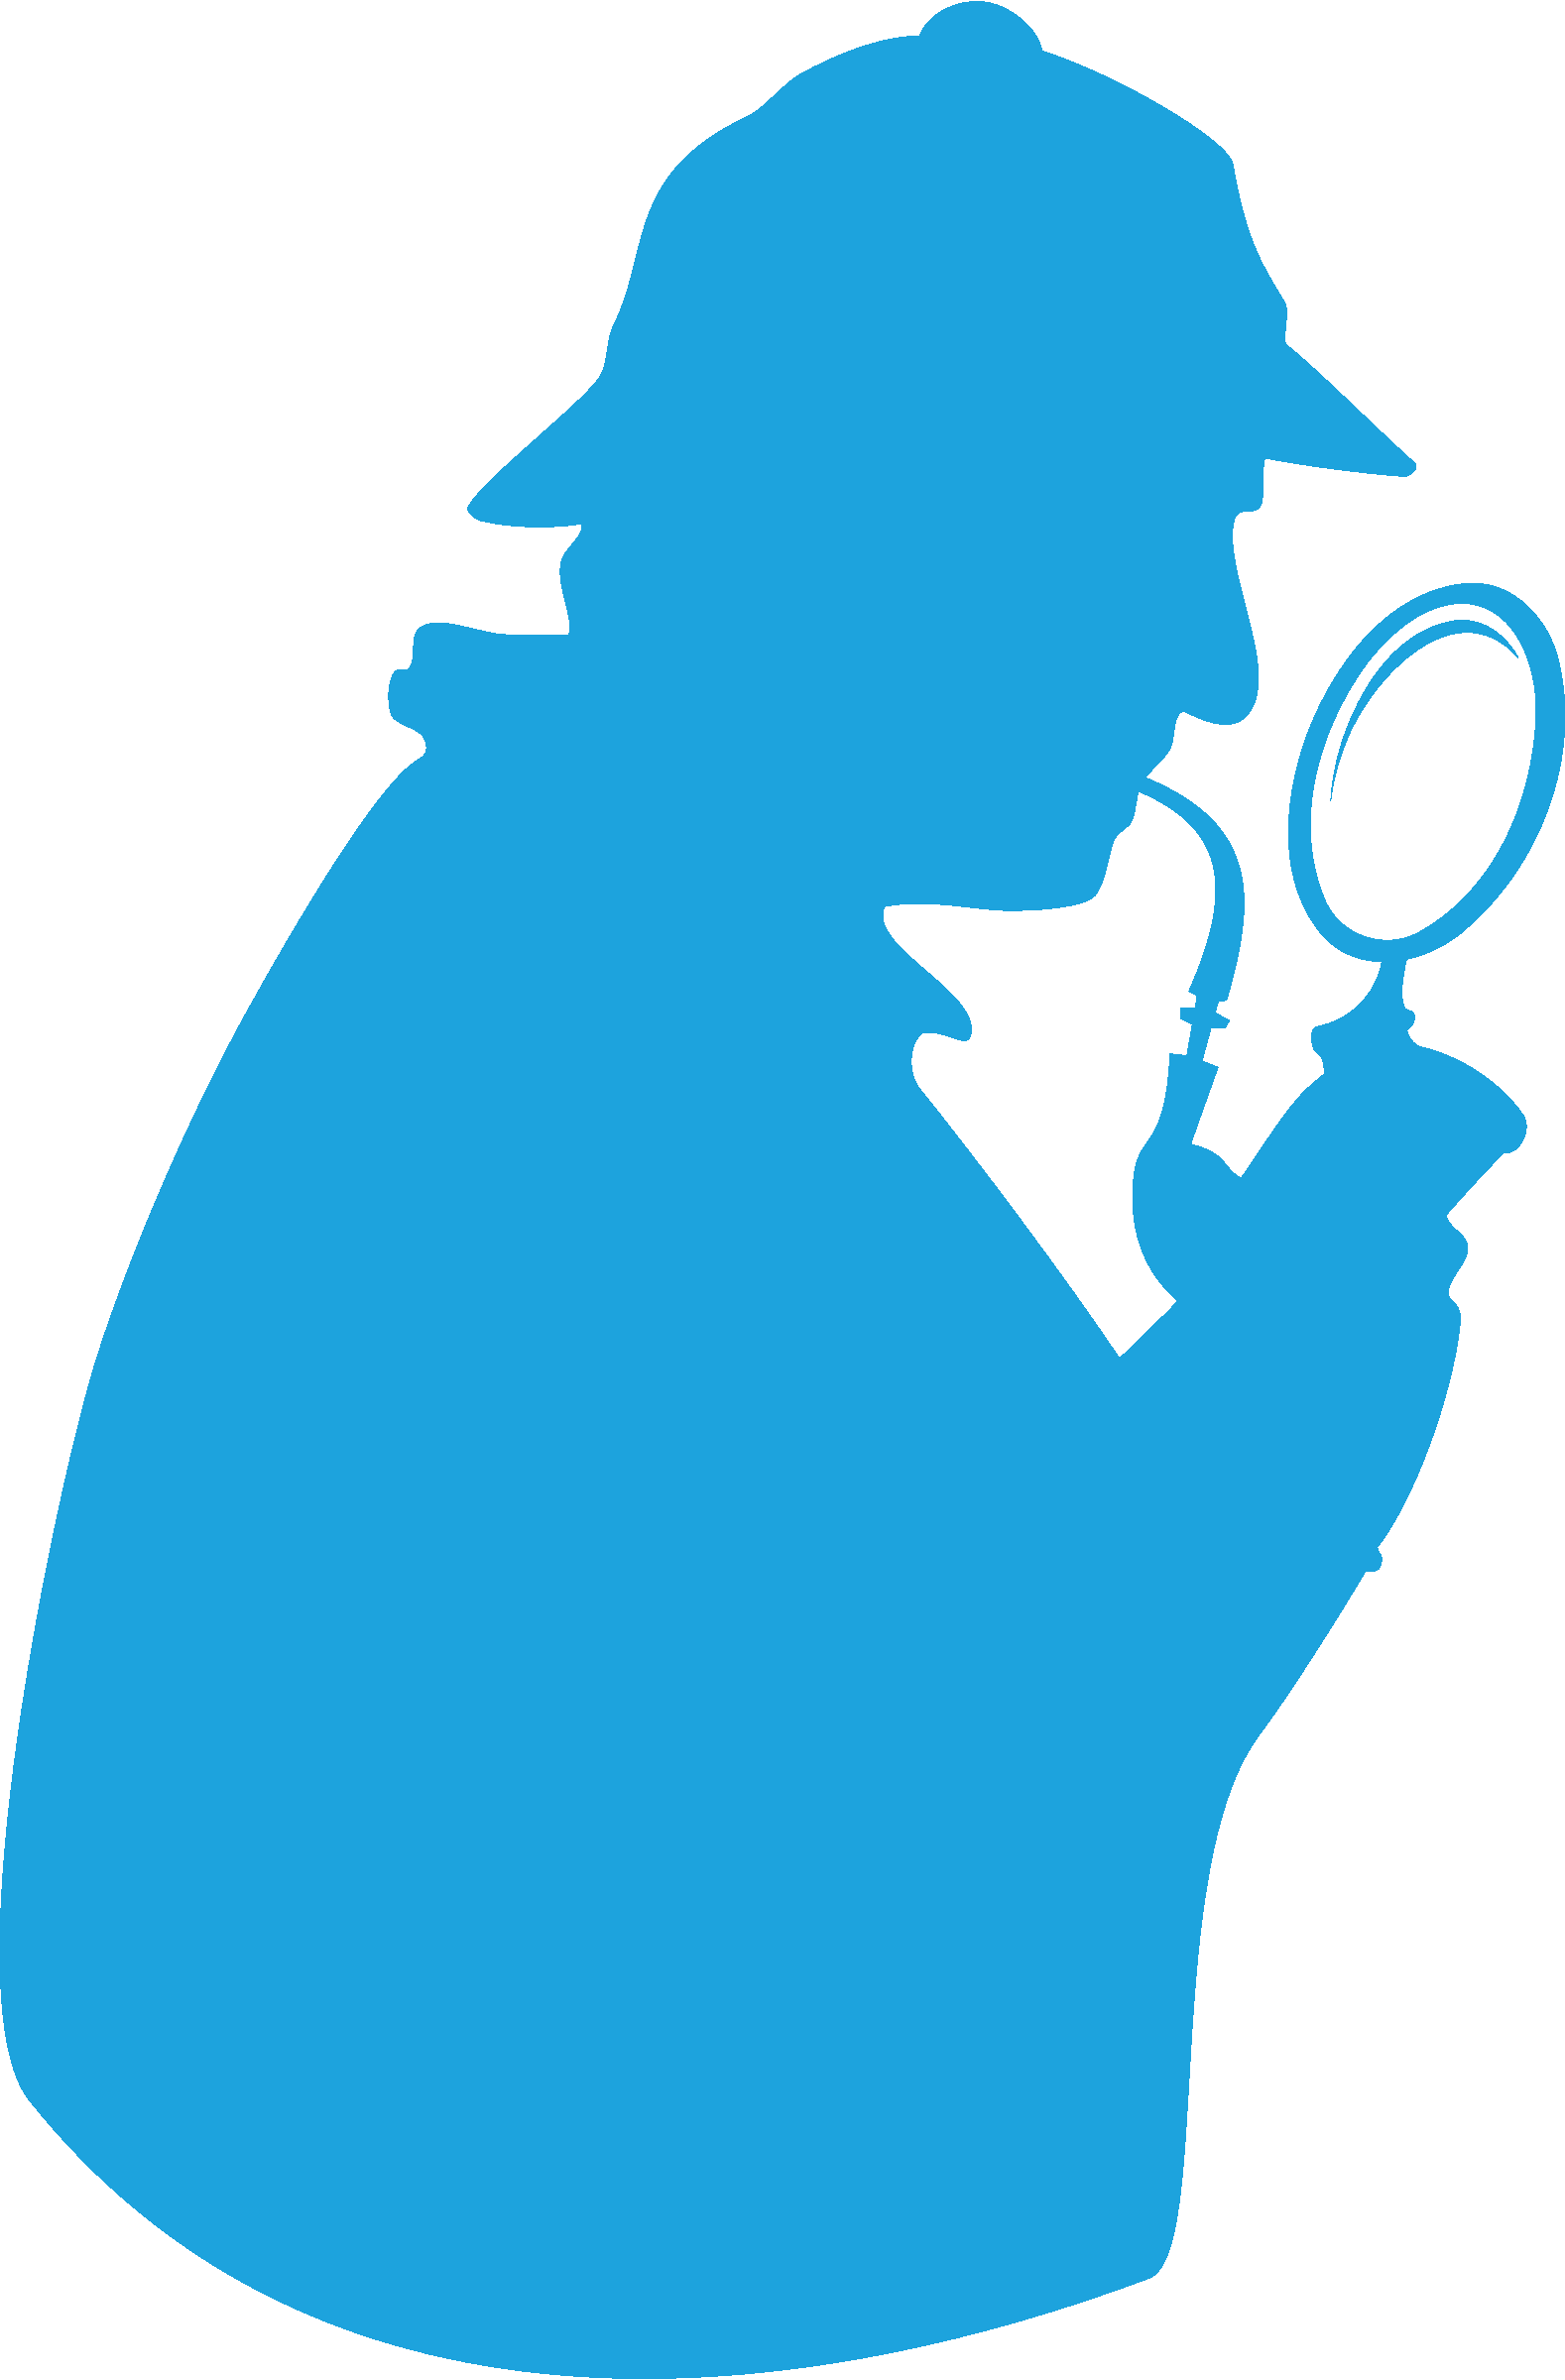 Ciwao Is Super Safe To Use - Sherlock Holmes Silhouette (1578x2400)